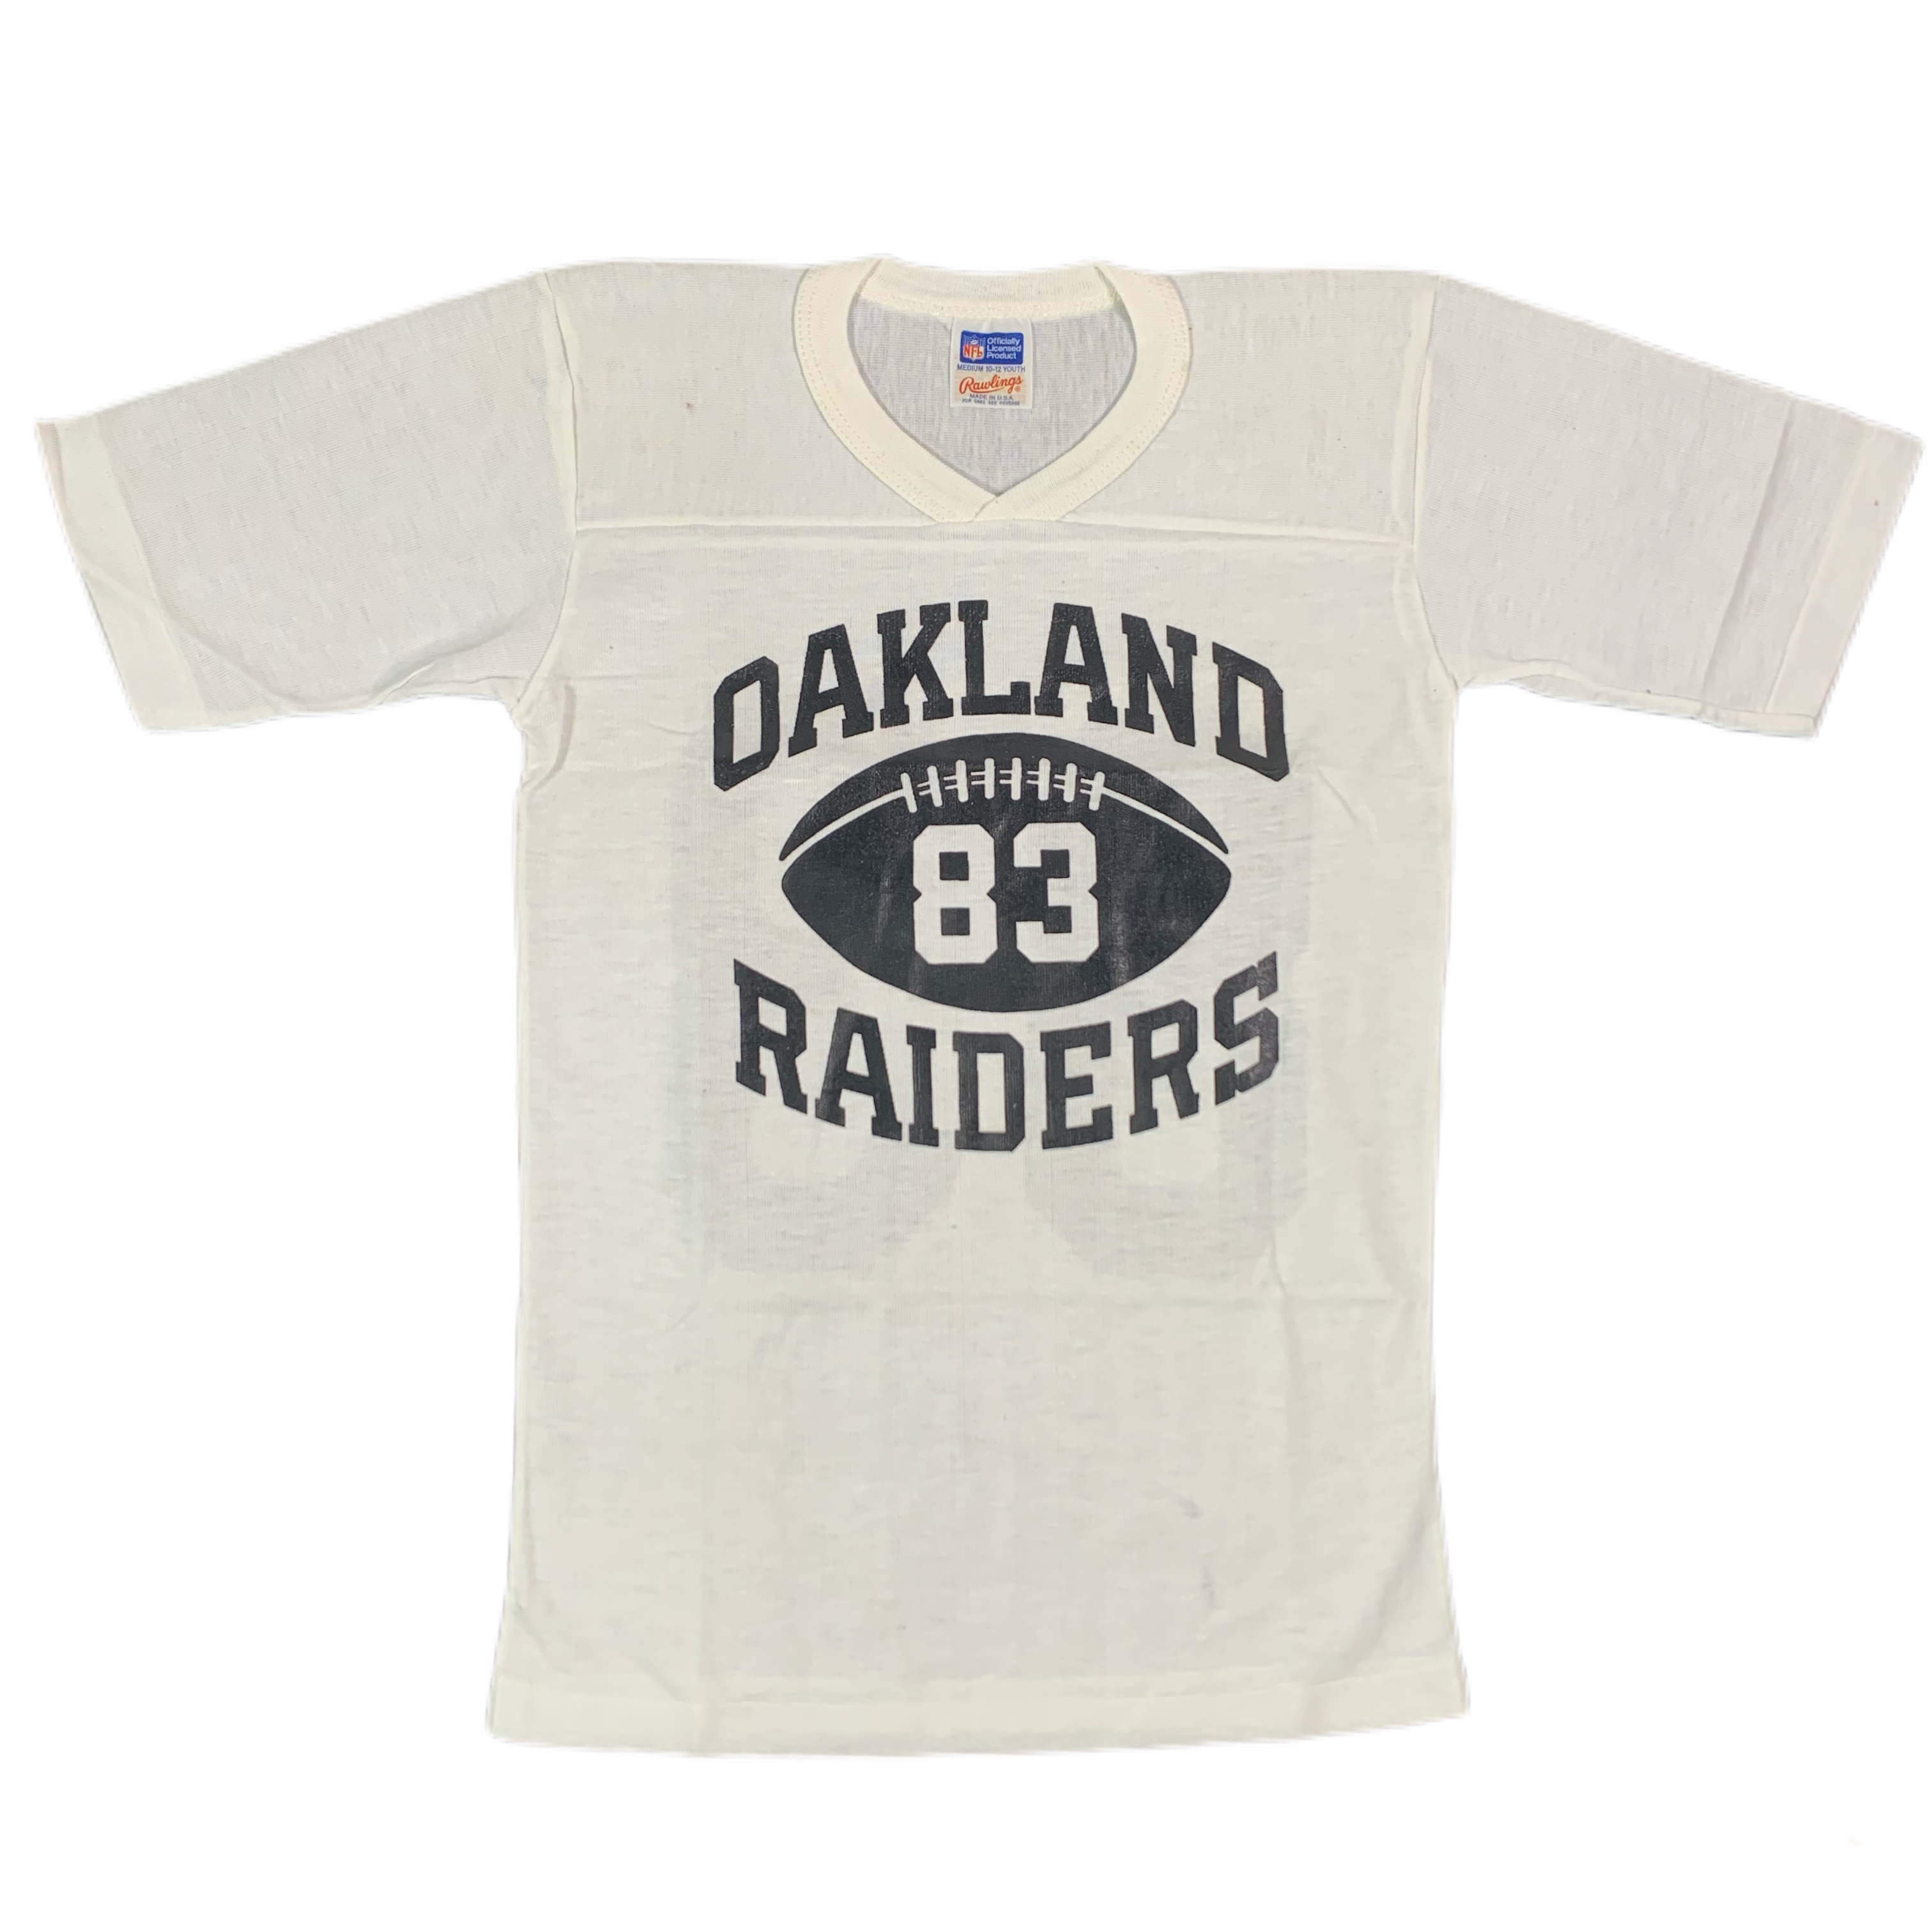 Raiders collectible player jersey